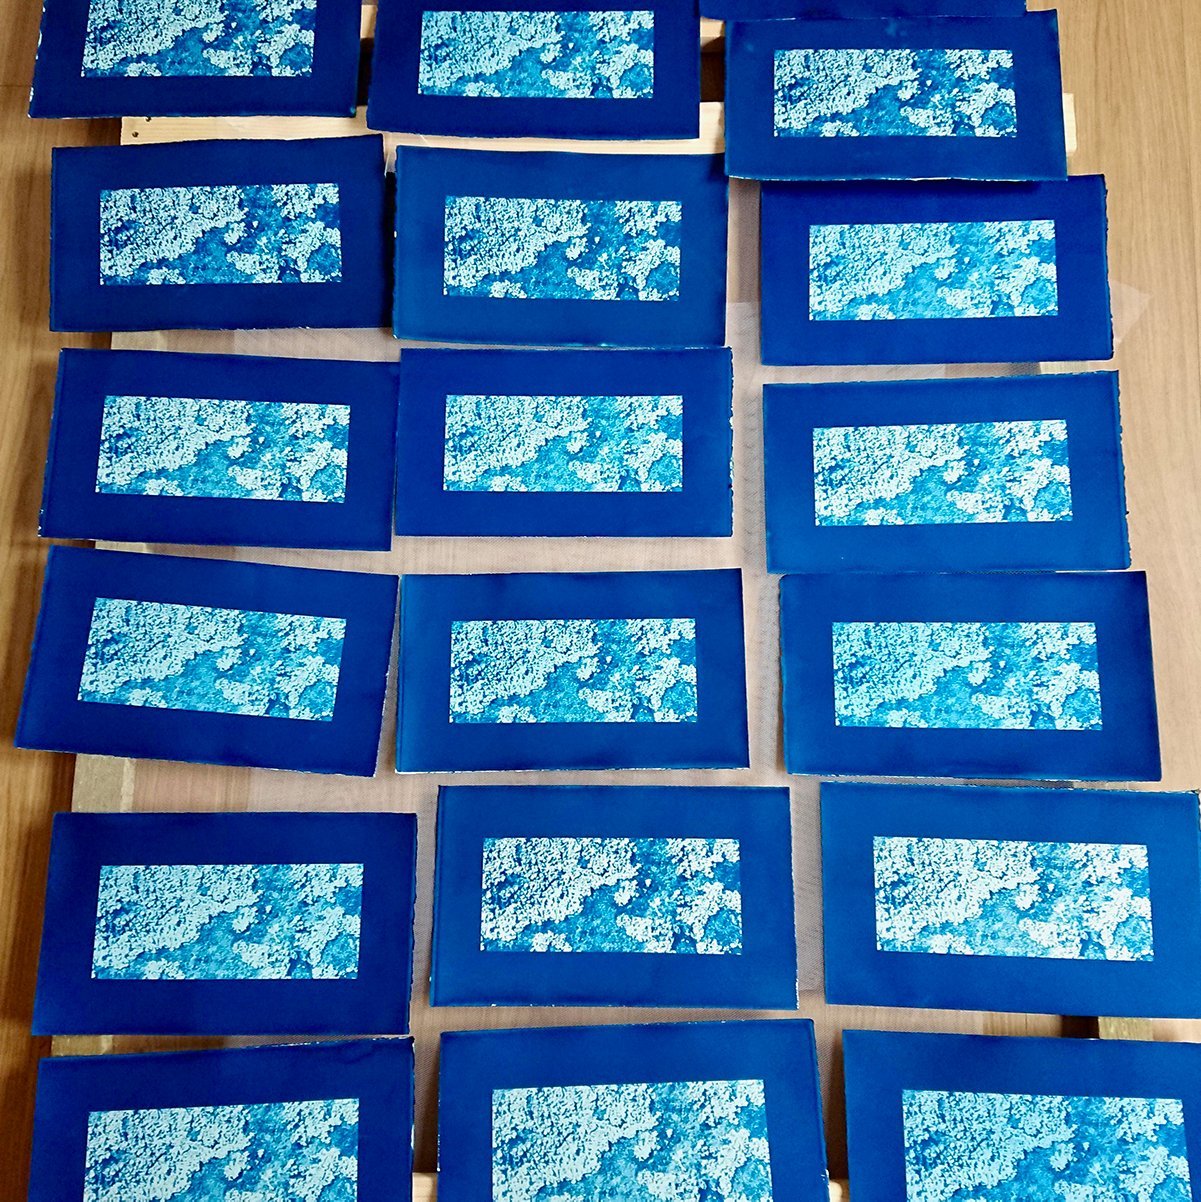 ‘Symbiont’, 2021, cyanotype variable edition of 25. 